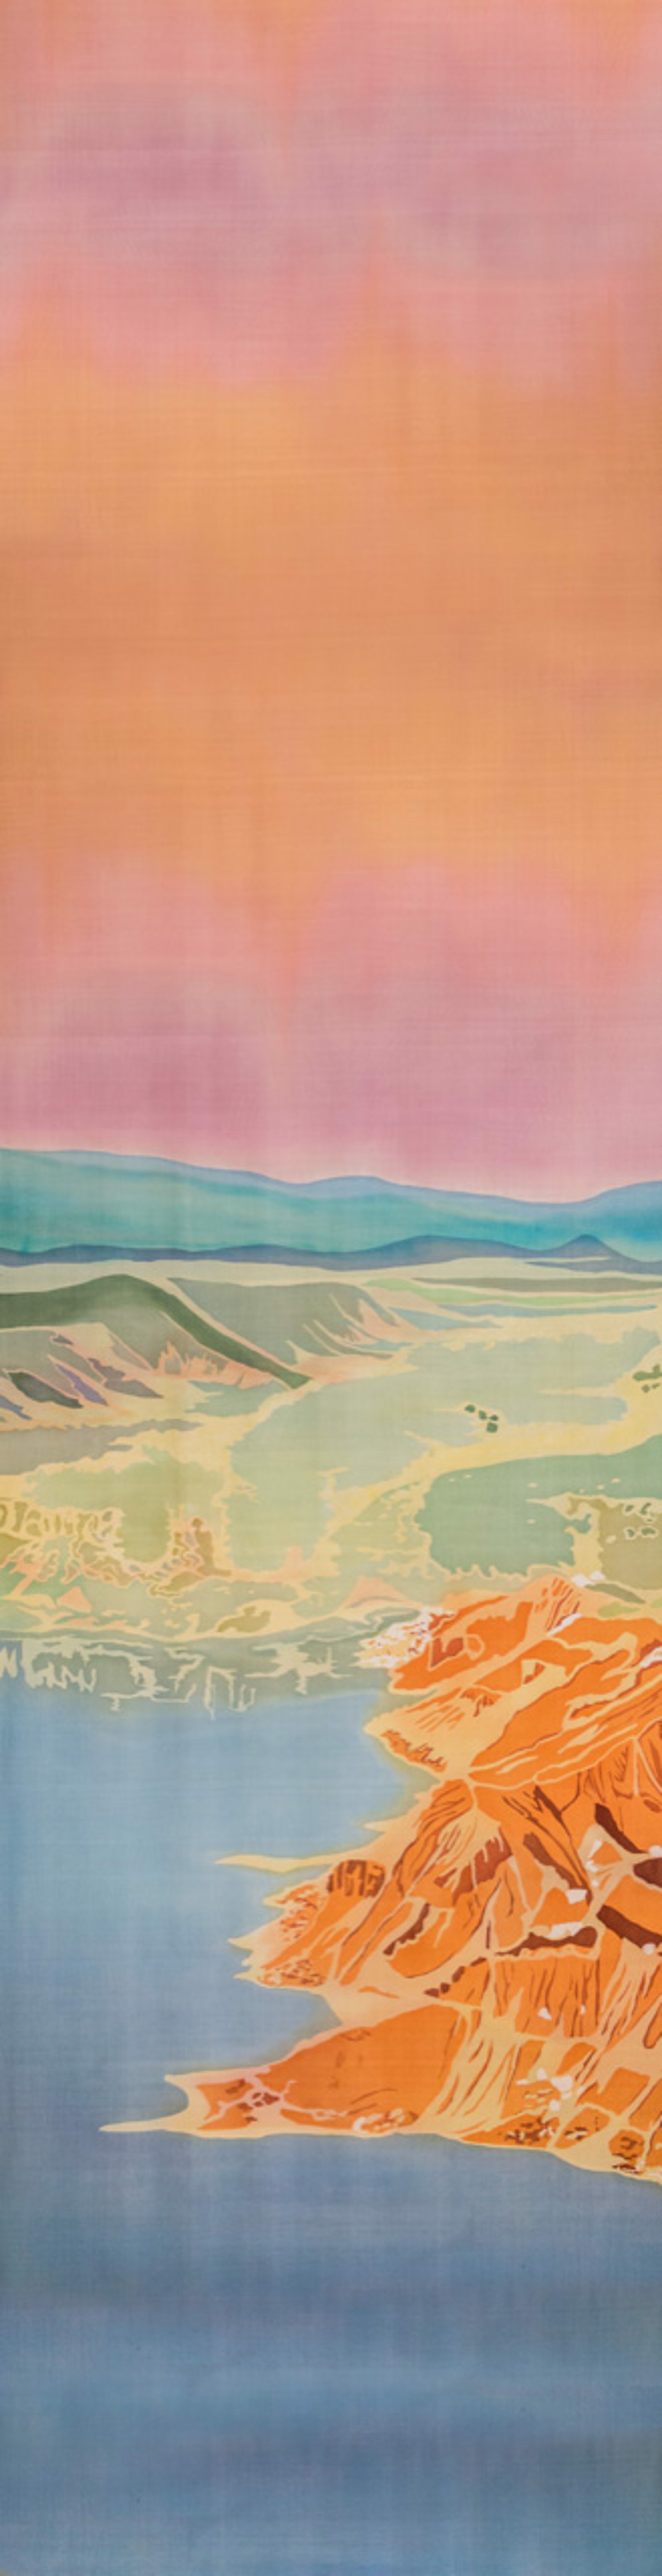 Abiquiu Lake, NM inspired silk scarf by Mary Edna Fraser